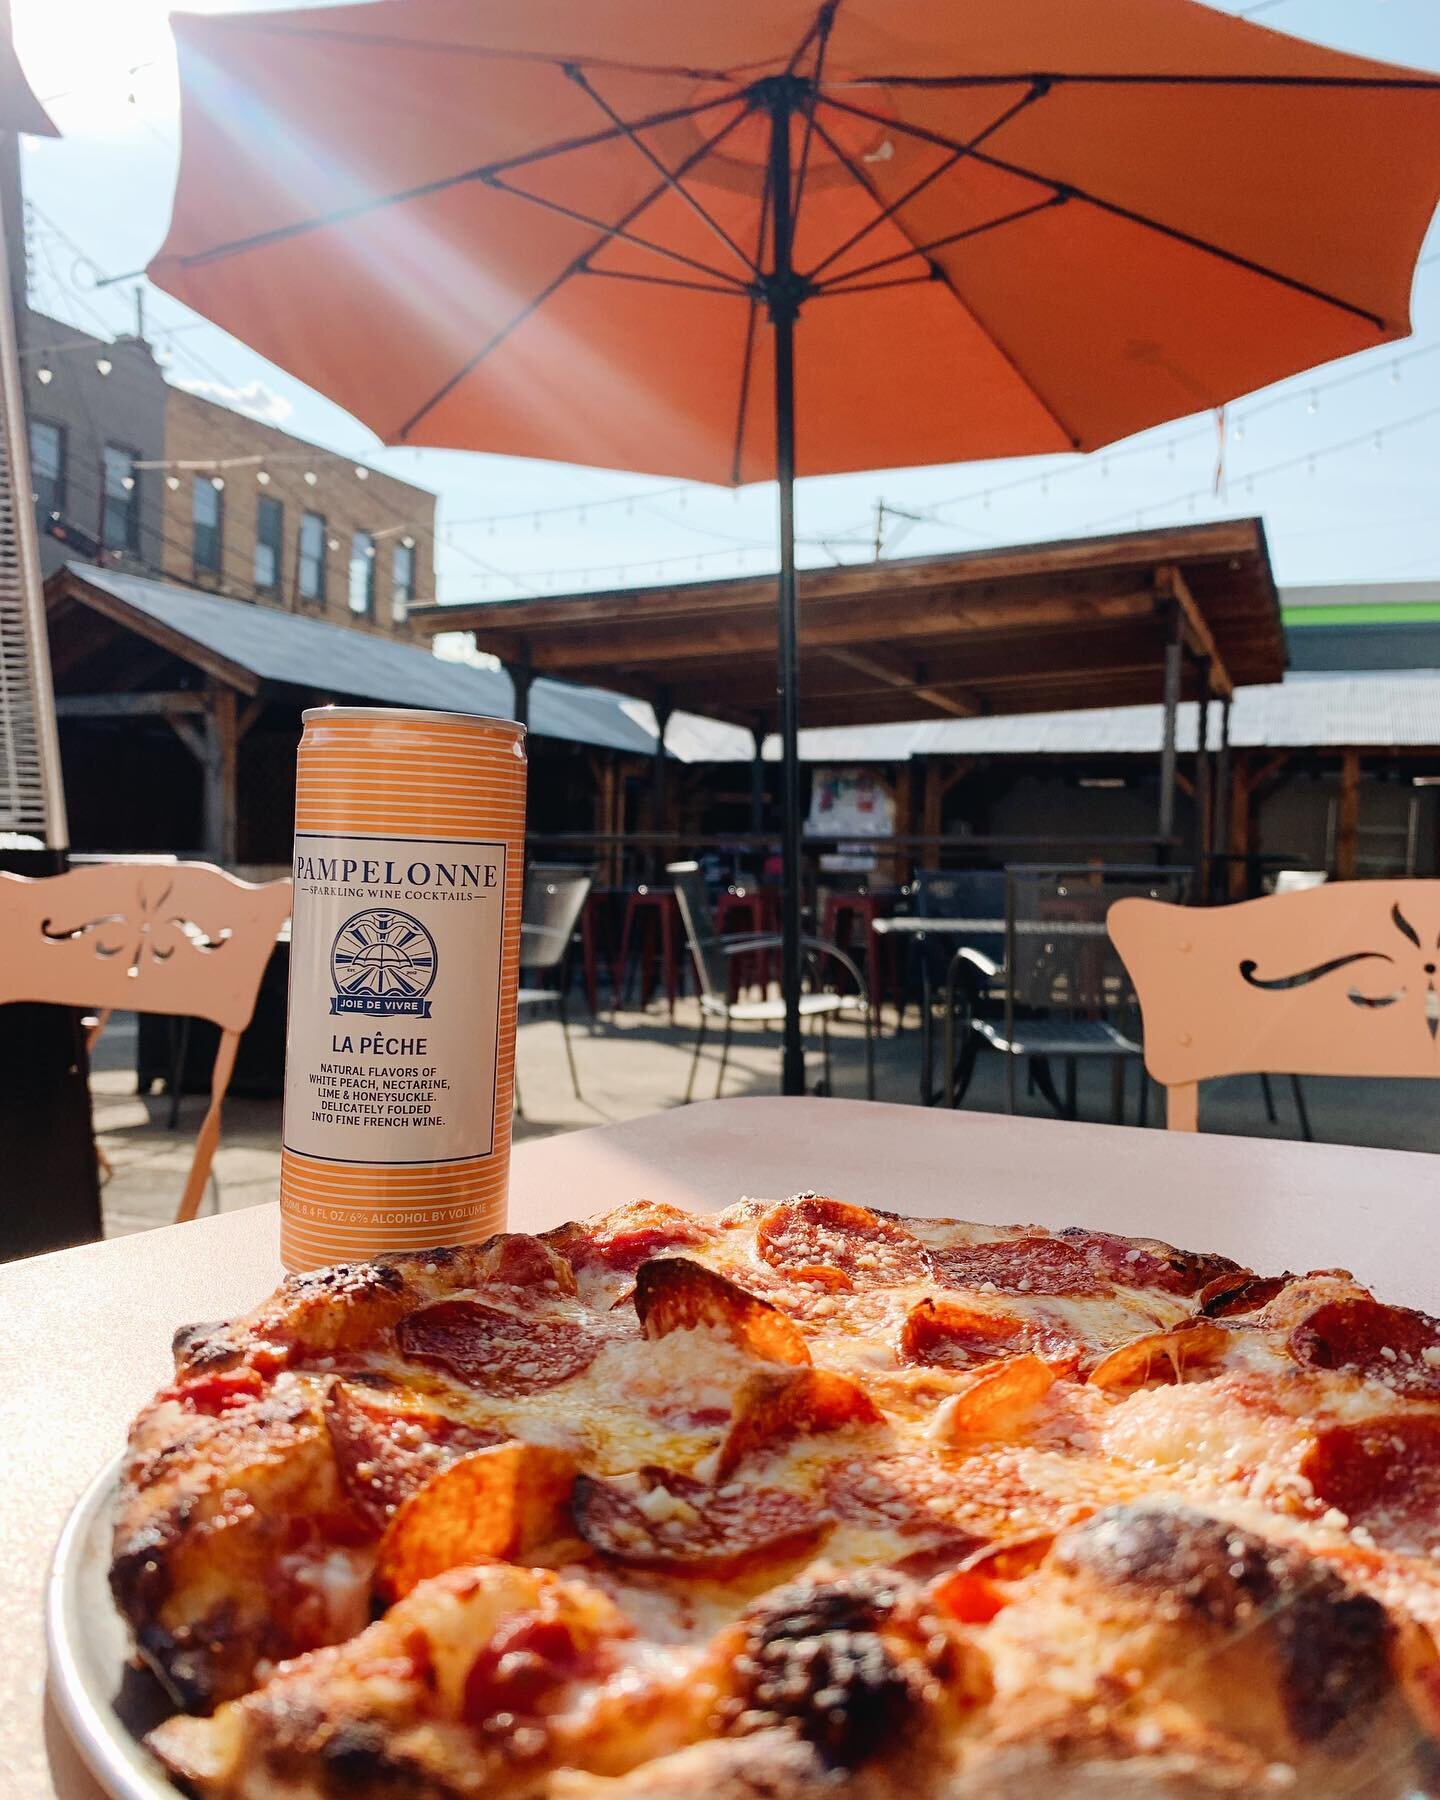 Try and catch the last little bit of sun today at @thepamarket while enjoying a pepperoni pie!! The Courtyard has covered seating just in case 🤪🙌☀️ we even have canned wines to help you kick off the weekend🥂🍕